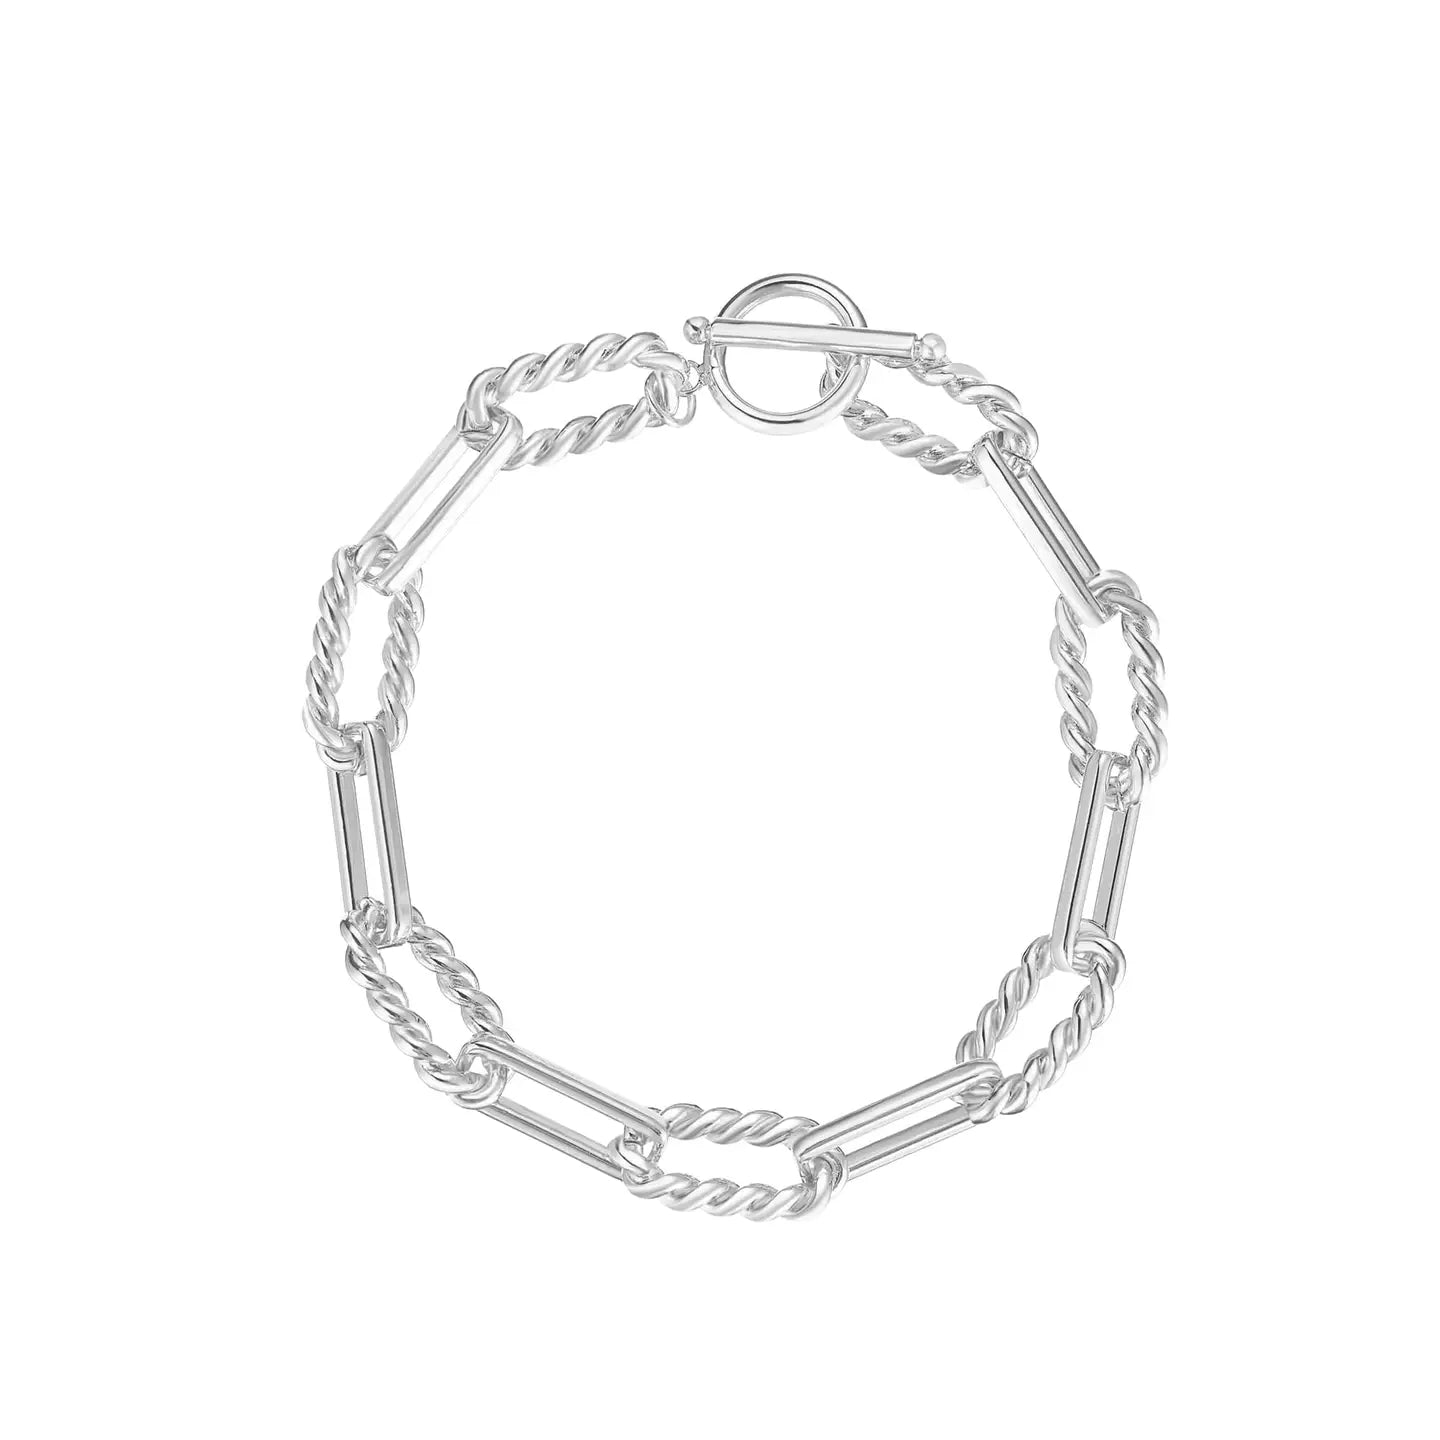 Natalie Wood - She's Spicy Chain Link Bracelet in Silver-110 Jewelry & Hair-Natalie Wood-July & June Women's Fashion Boutique Located in San Antonio, Texas